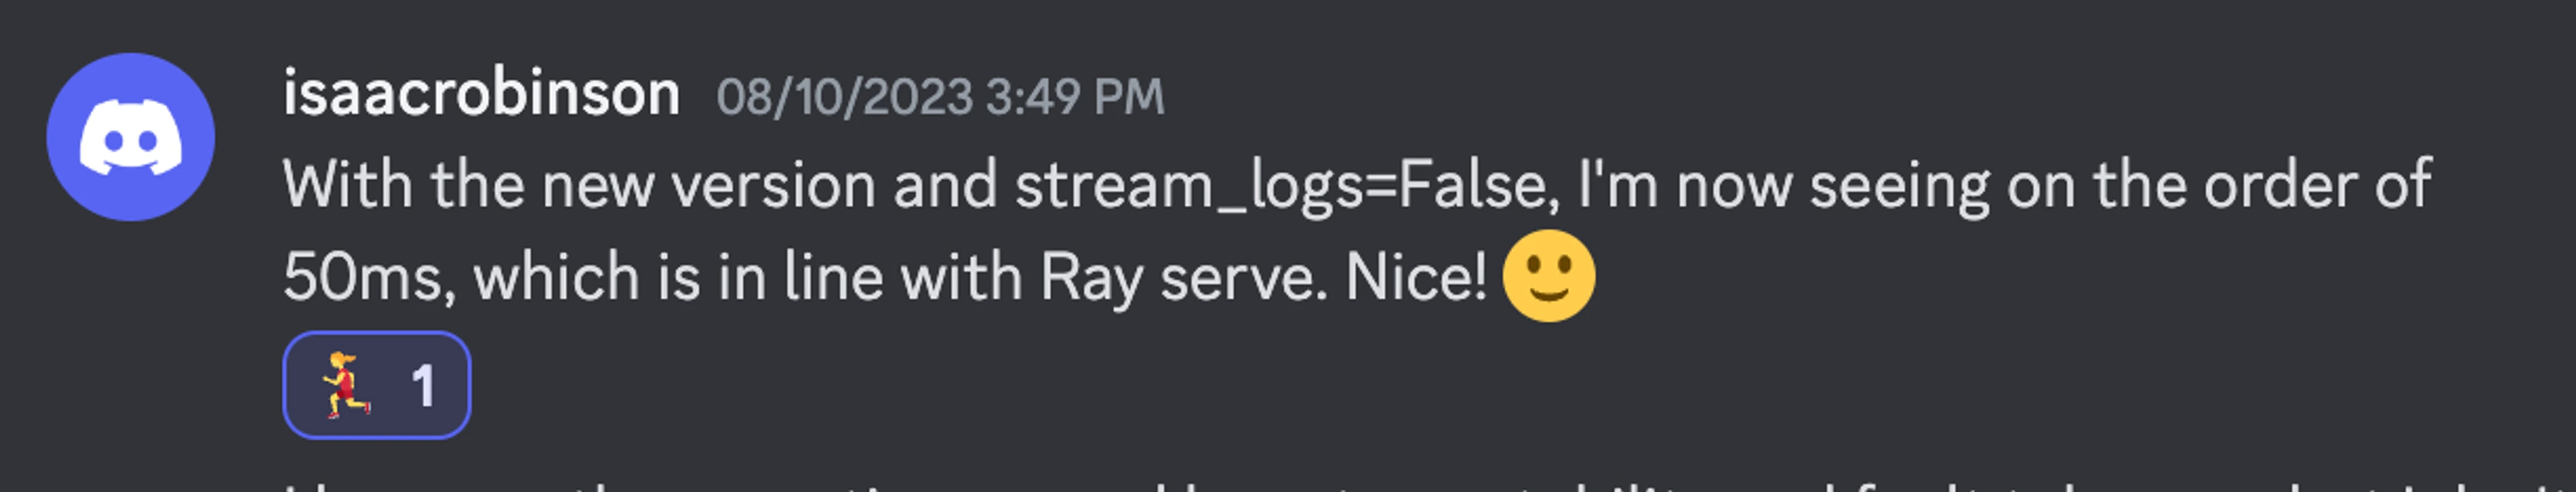 With the new version and stream_logs=False, I'm now seeing on the order of 50ms, which is in line with Ray serve. Nice! 🙂